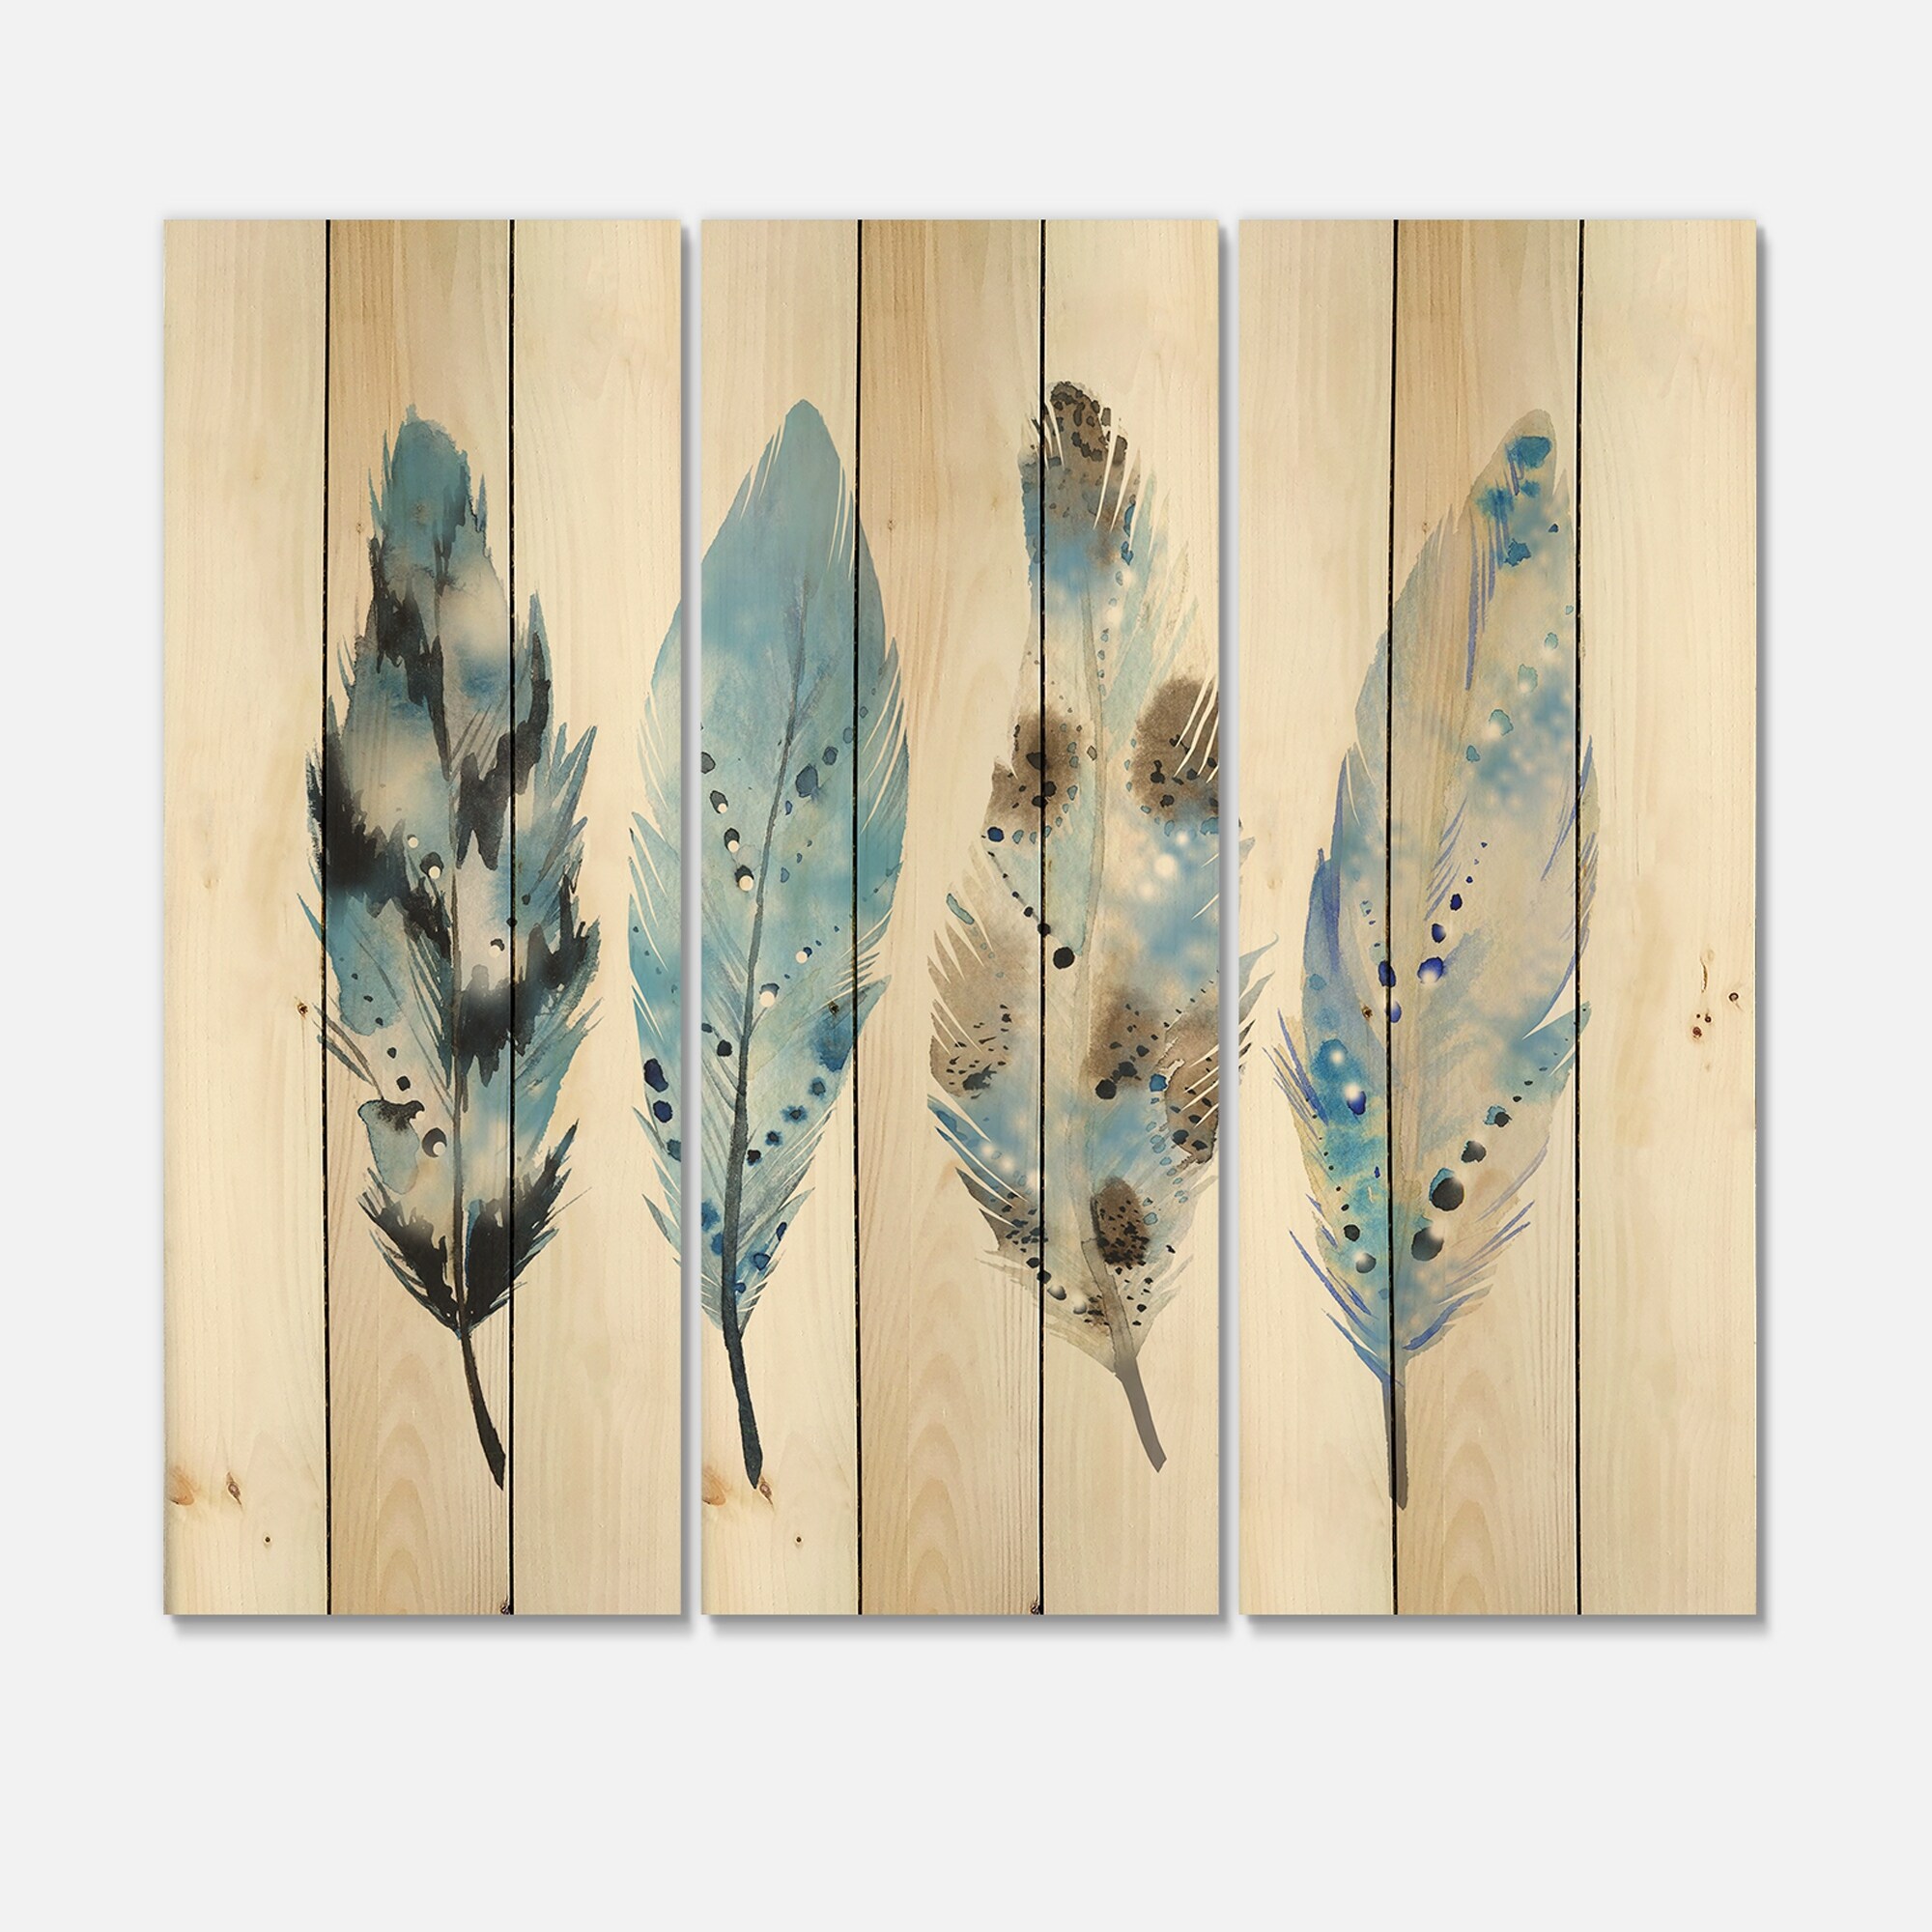 Blue Feathers On Wood Wall Art